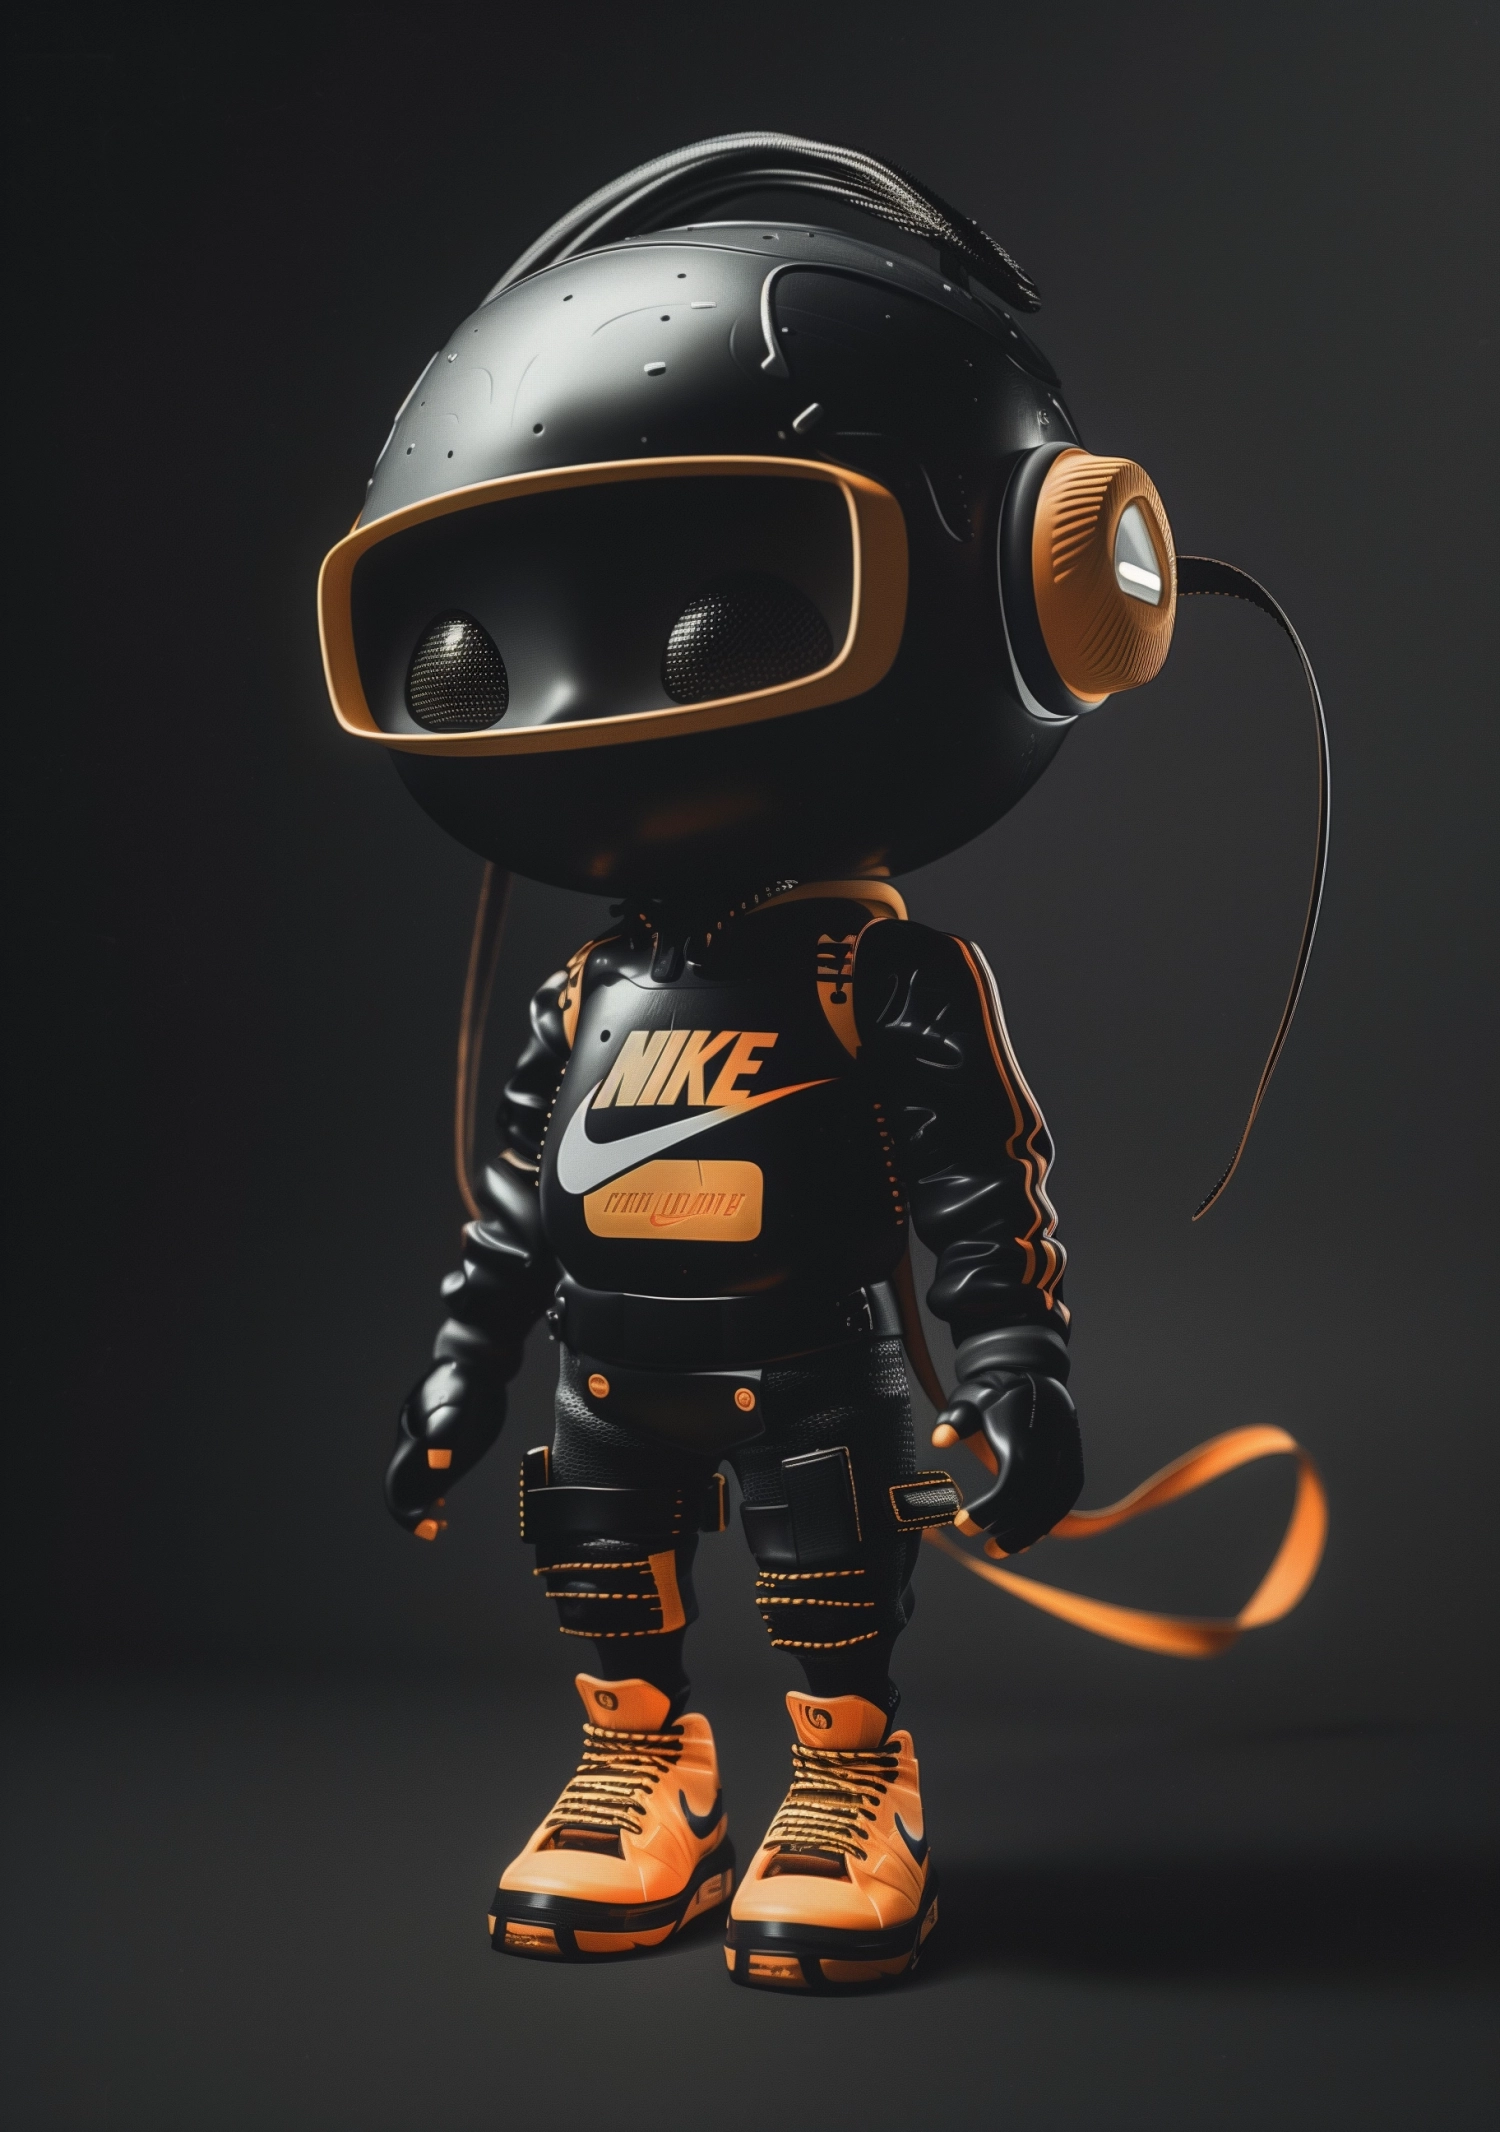 black and orange modeled polaroid print & plastic, the illustration shows a quirky character with Nike Brand style dressed in an Nike walking around, in the style of adorable toy sculptures, rendered in cinema4d, strong facial expression, pop-culture-infused. Black background.